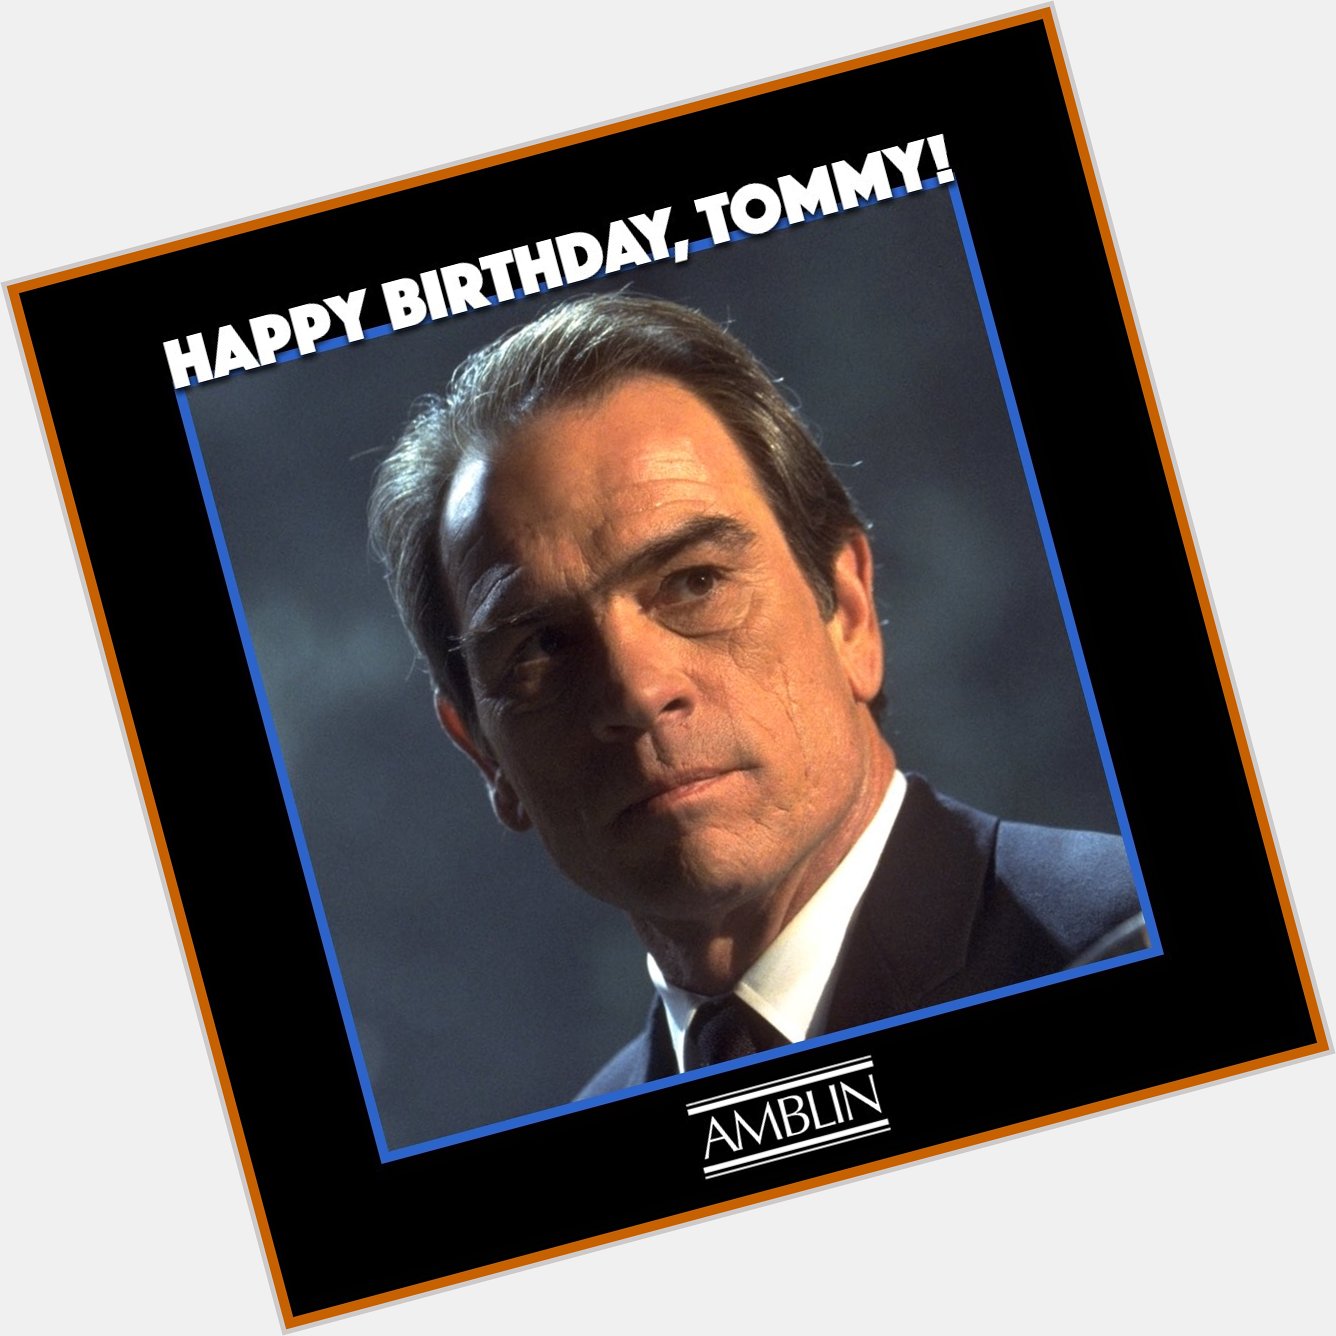 Happy birthday Tommy Lee Jones. Loved your role in Volcano 